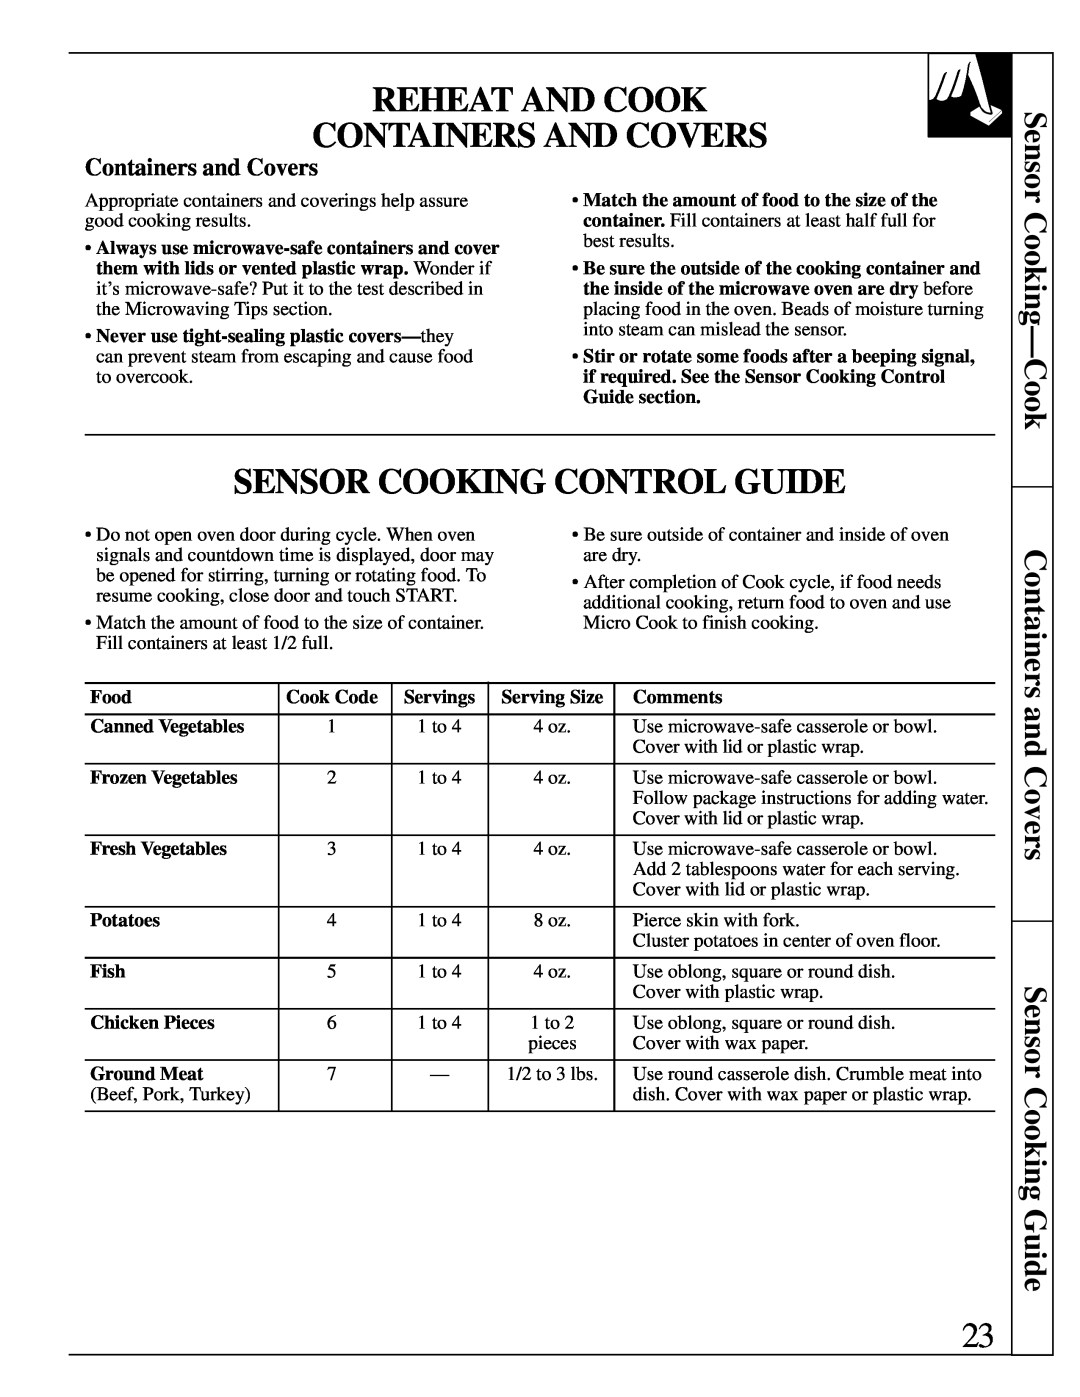 GE 164D2966P147 Reheat And Cook Containers And Covers, Sensor Cooking Control Guide, Cooking—Cook, Containers and Covers 